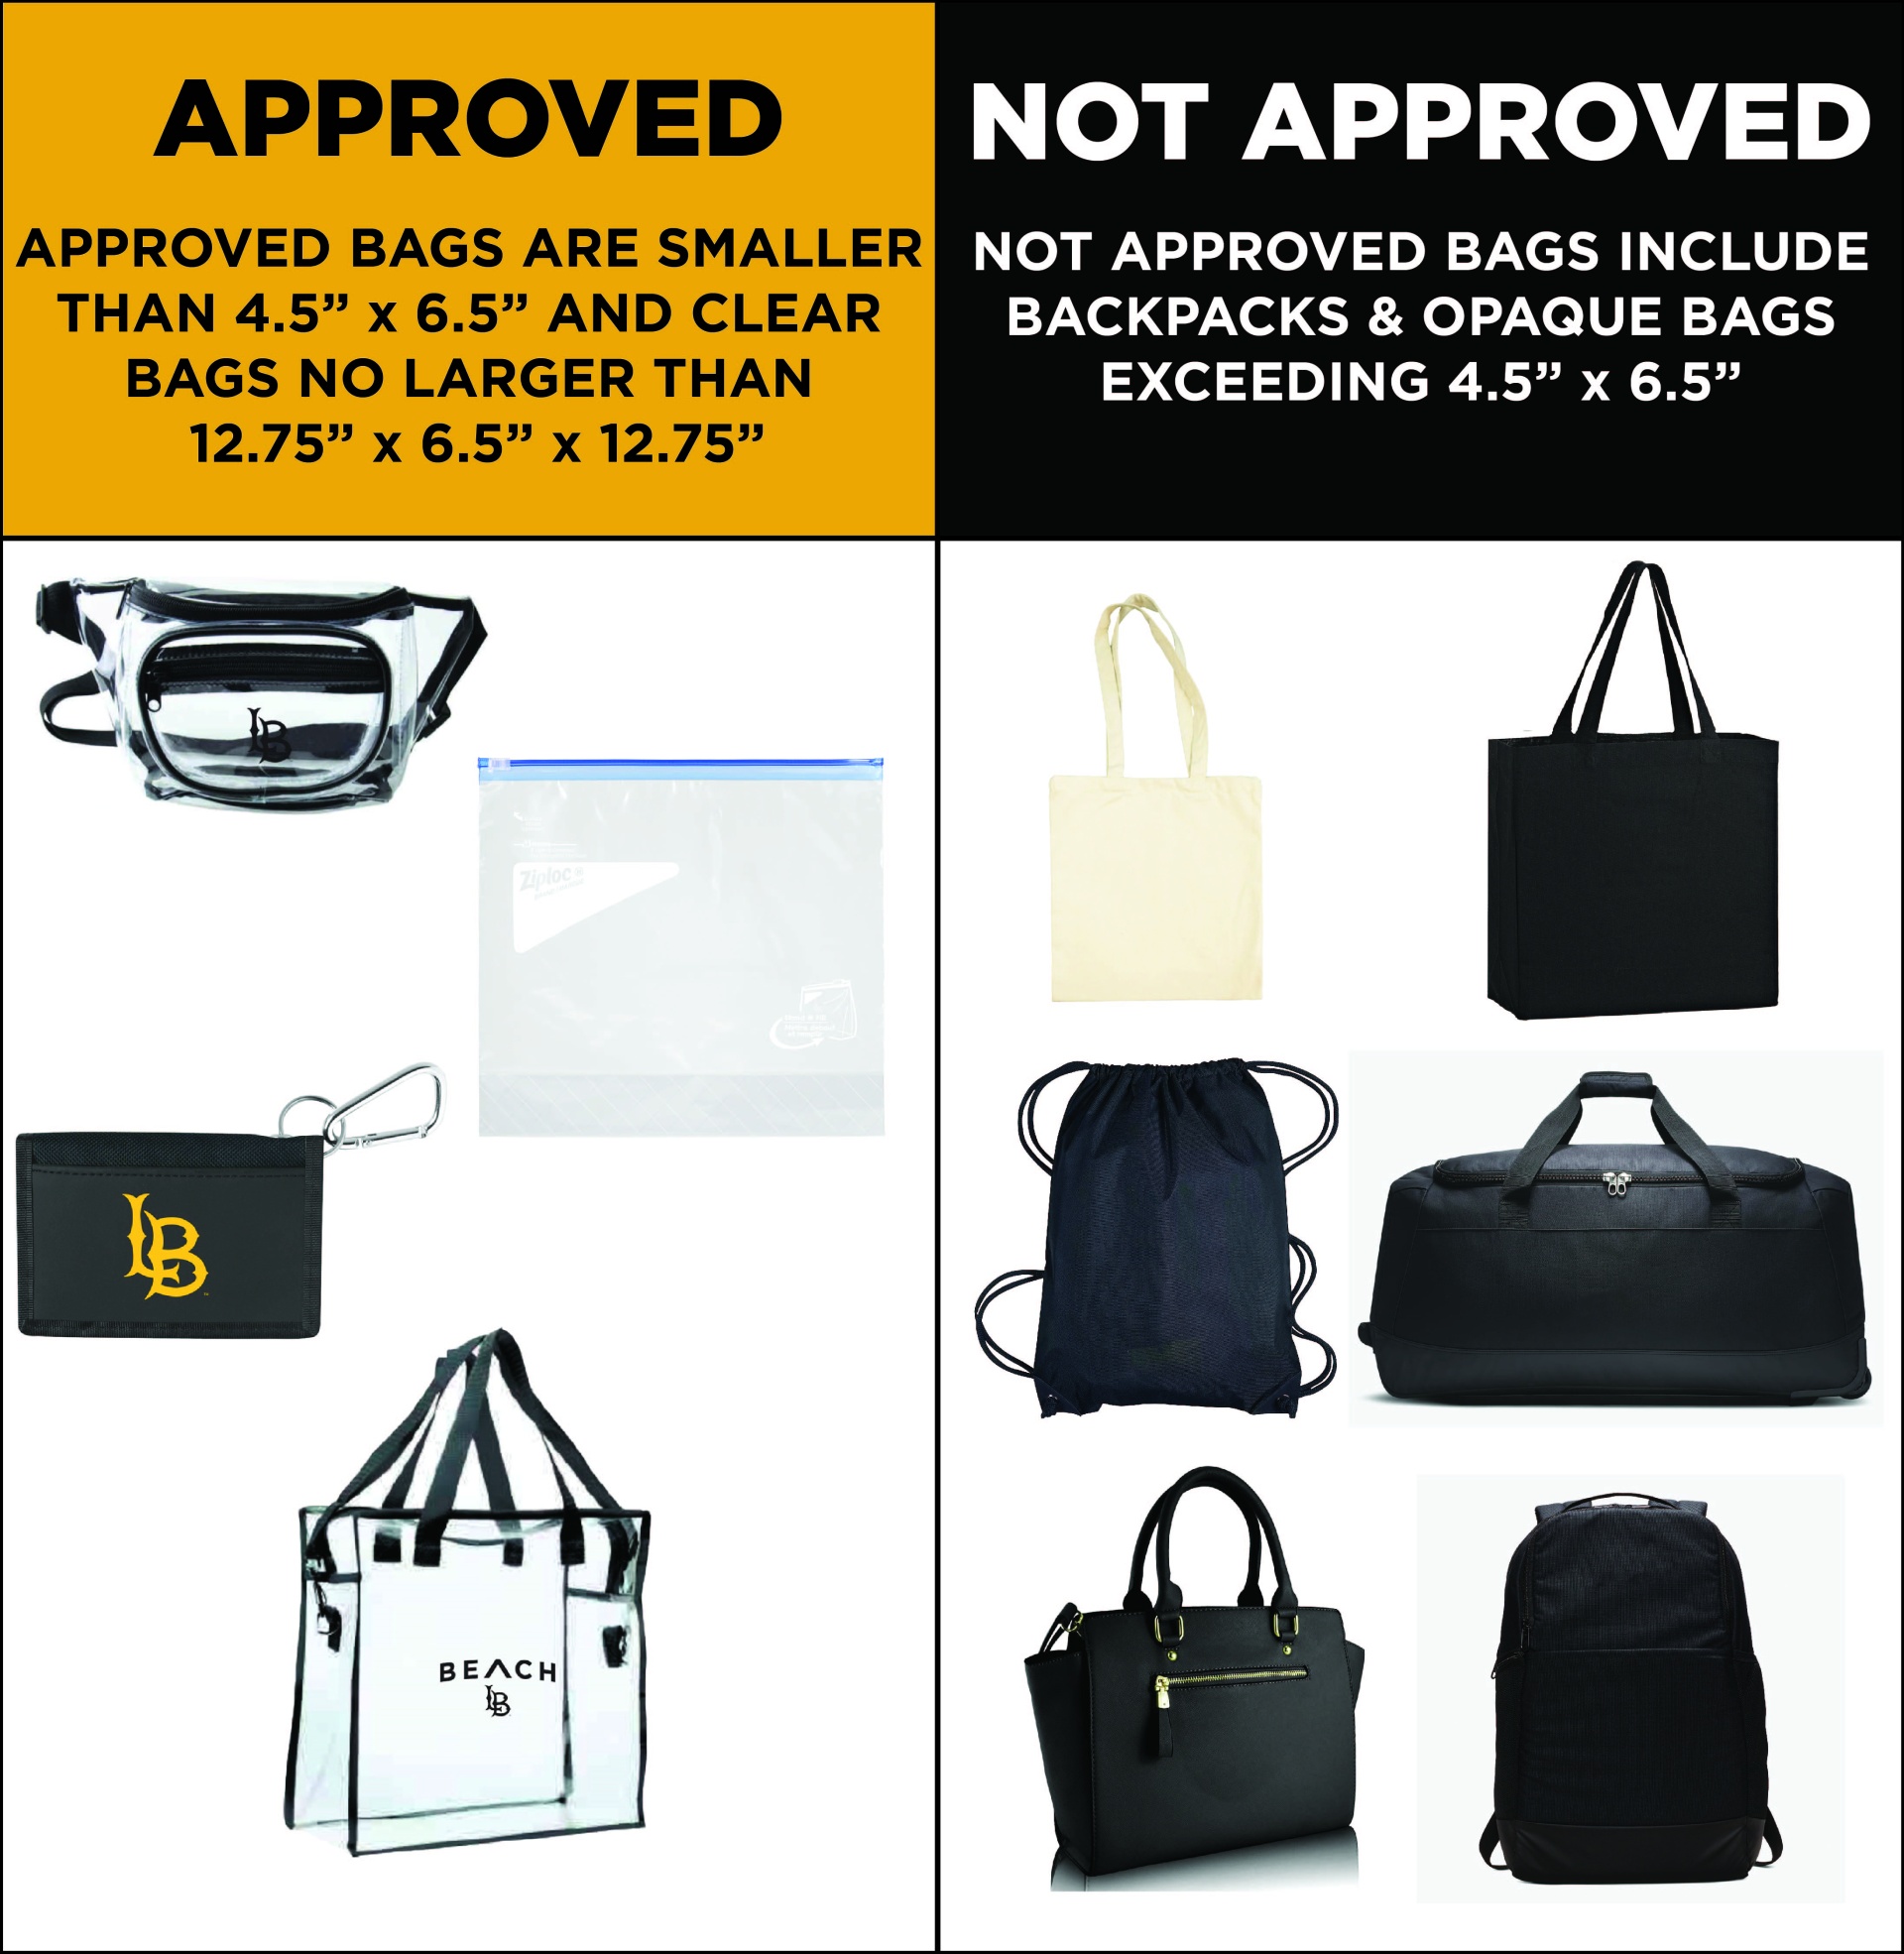 CSULB Clear Tote Bags